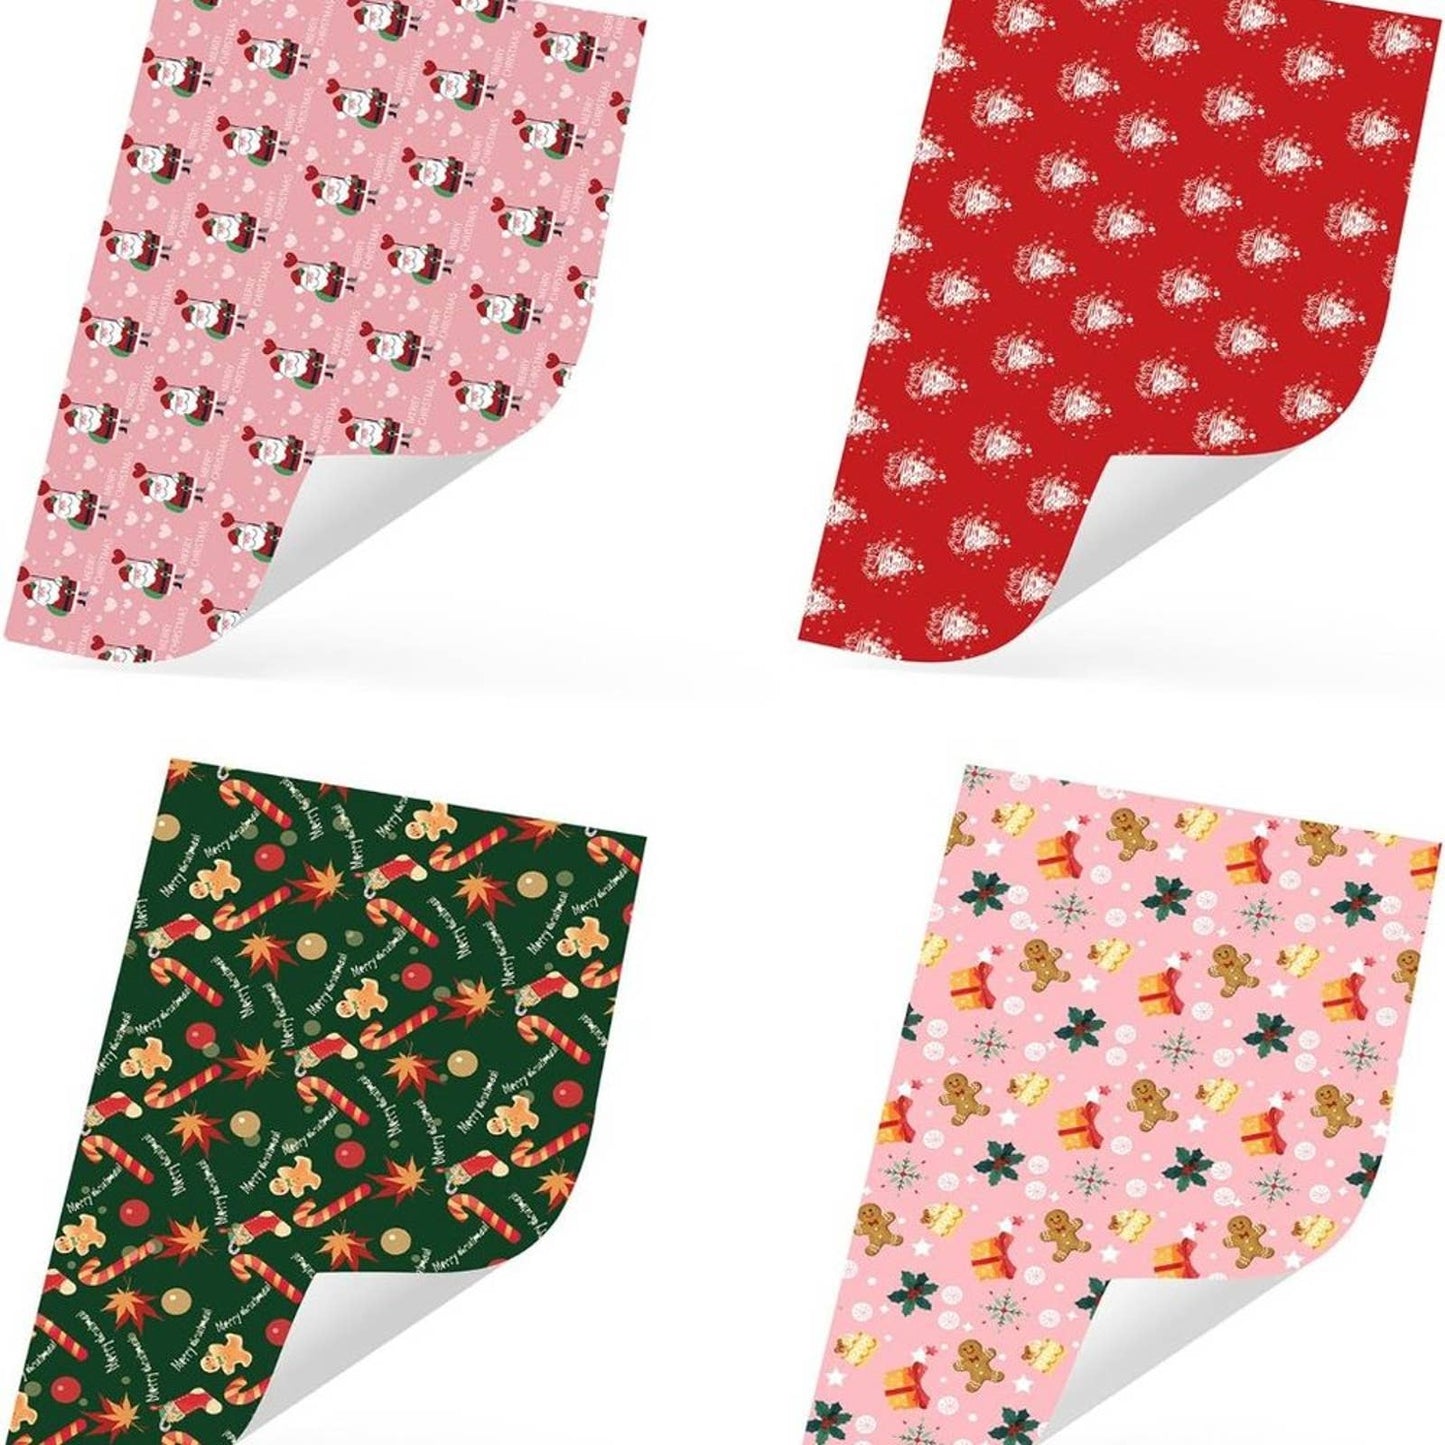 Ulmasinn Christmas Wrapping Paper for Kids Girls Boys,Pink Red Green